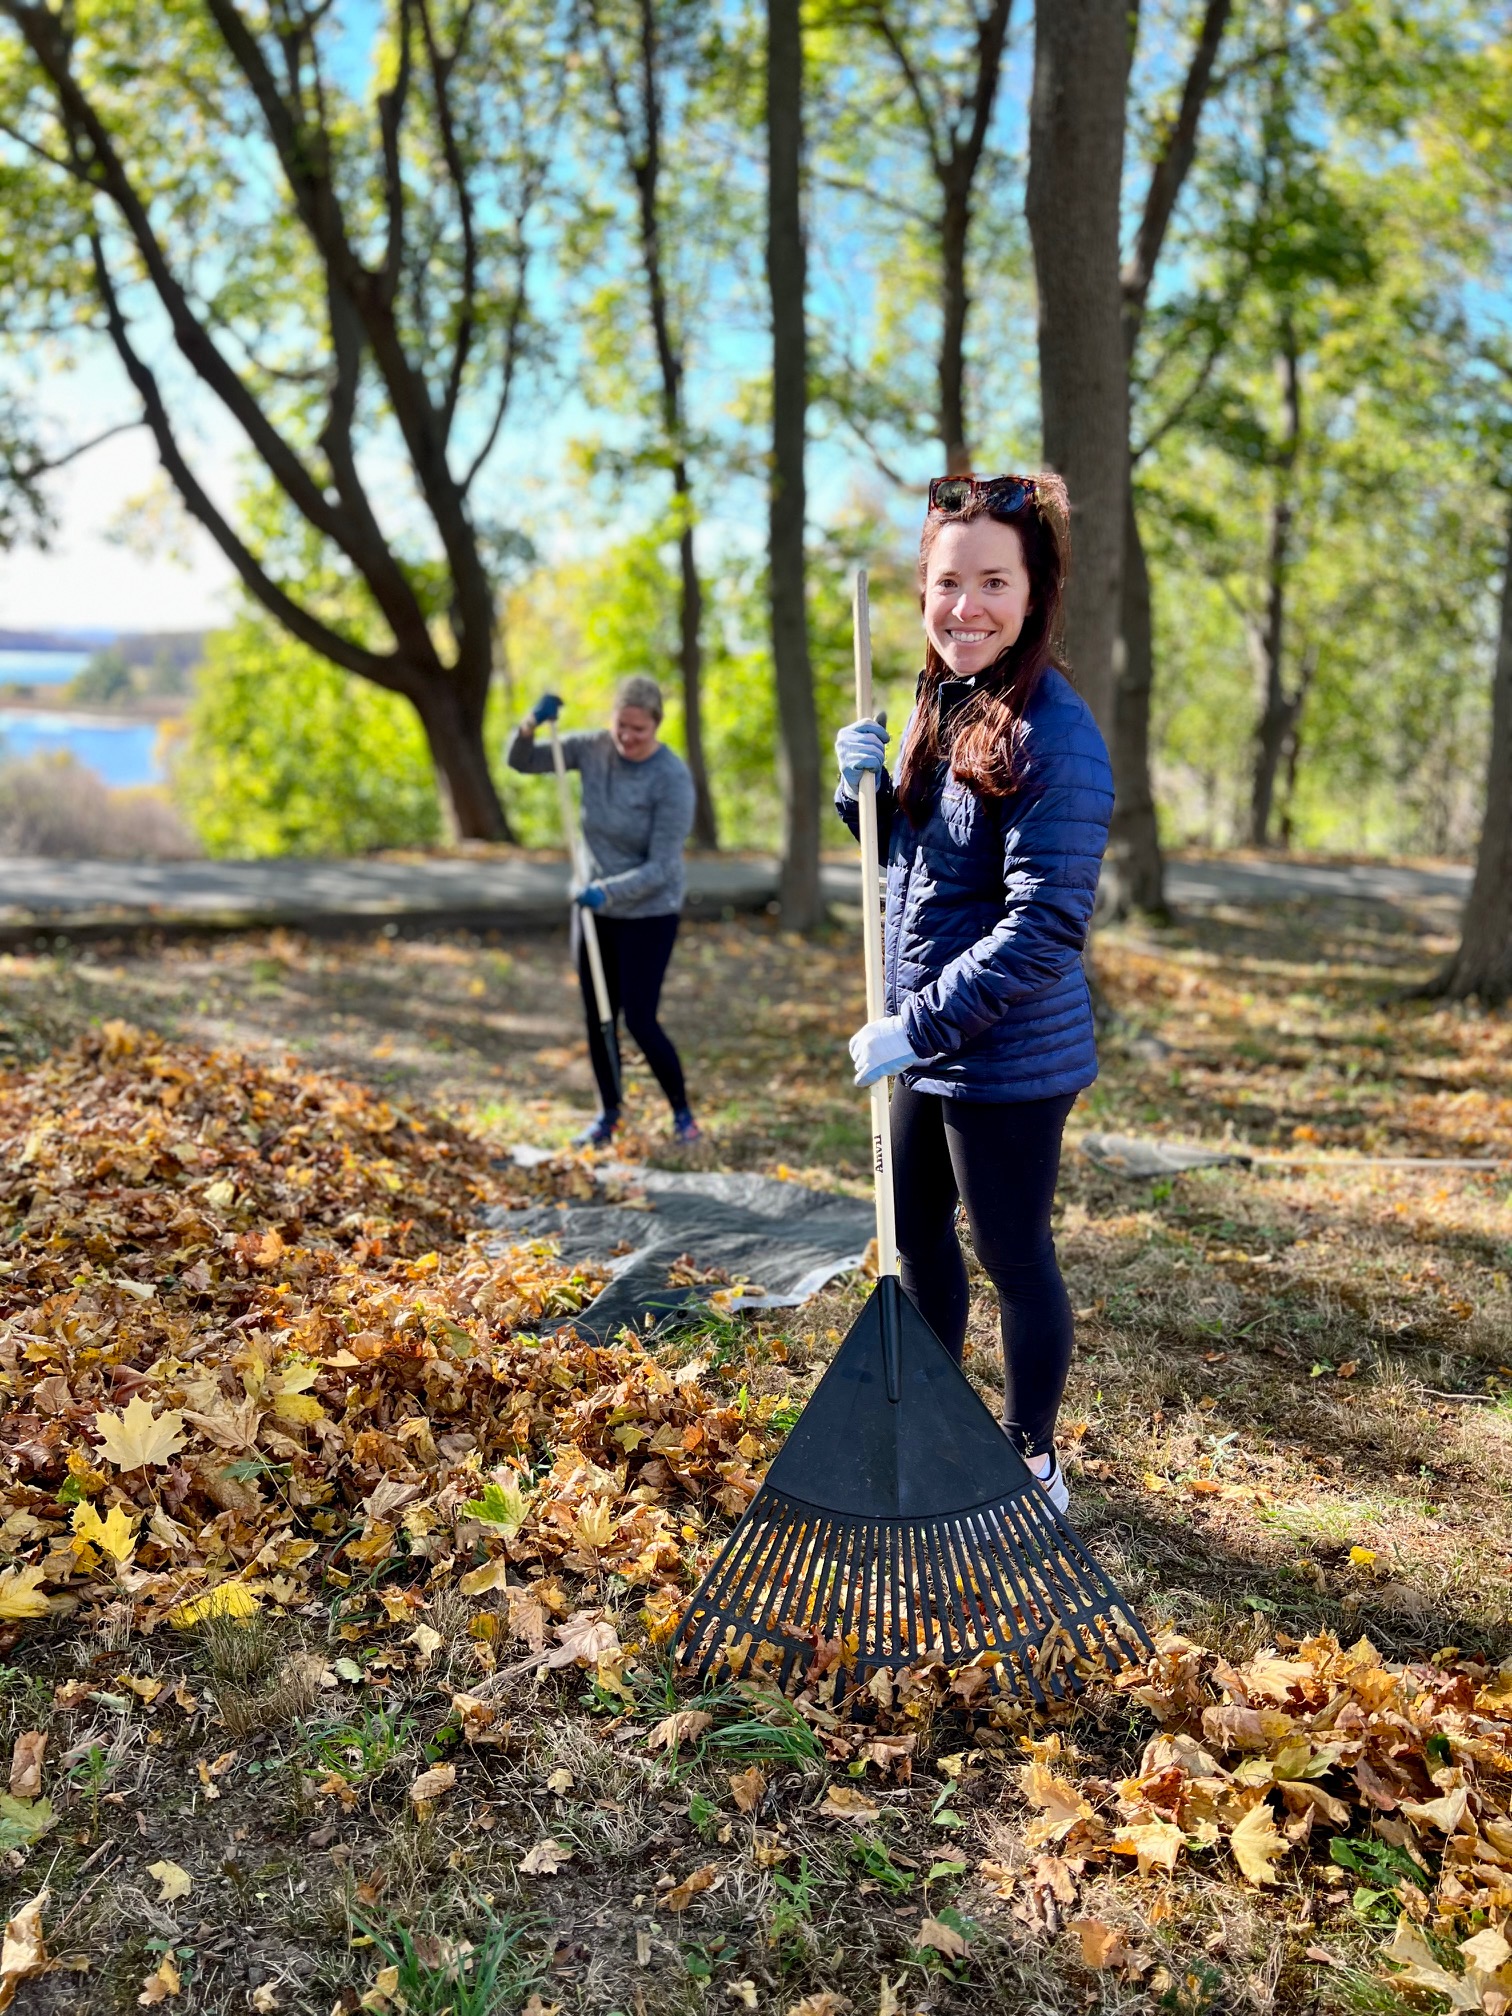 A team member pauses from raking leaves and smiles.